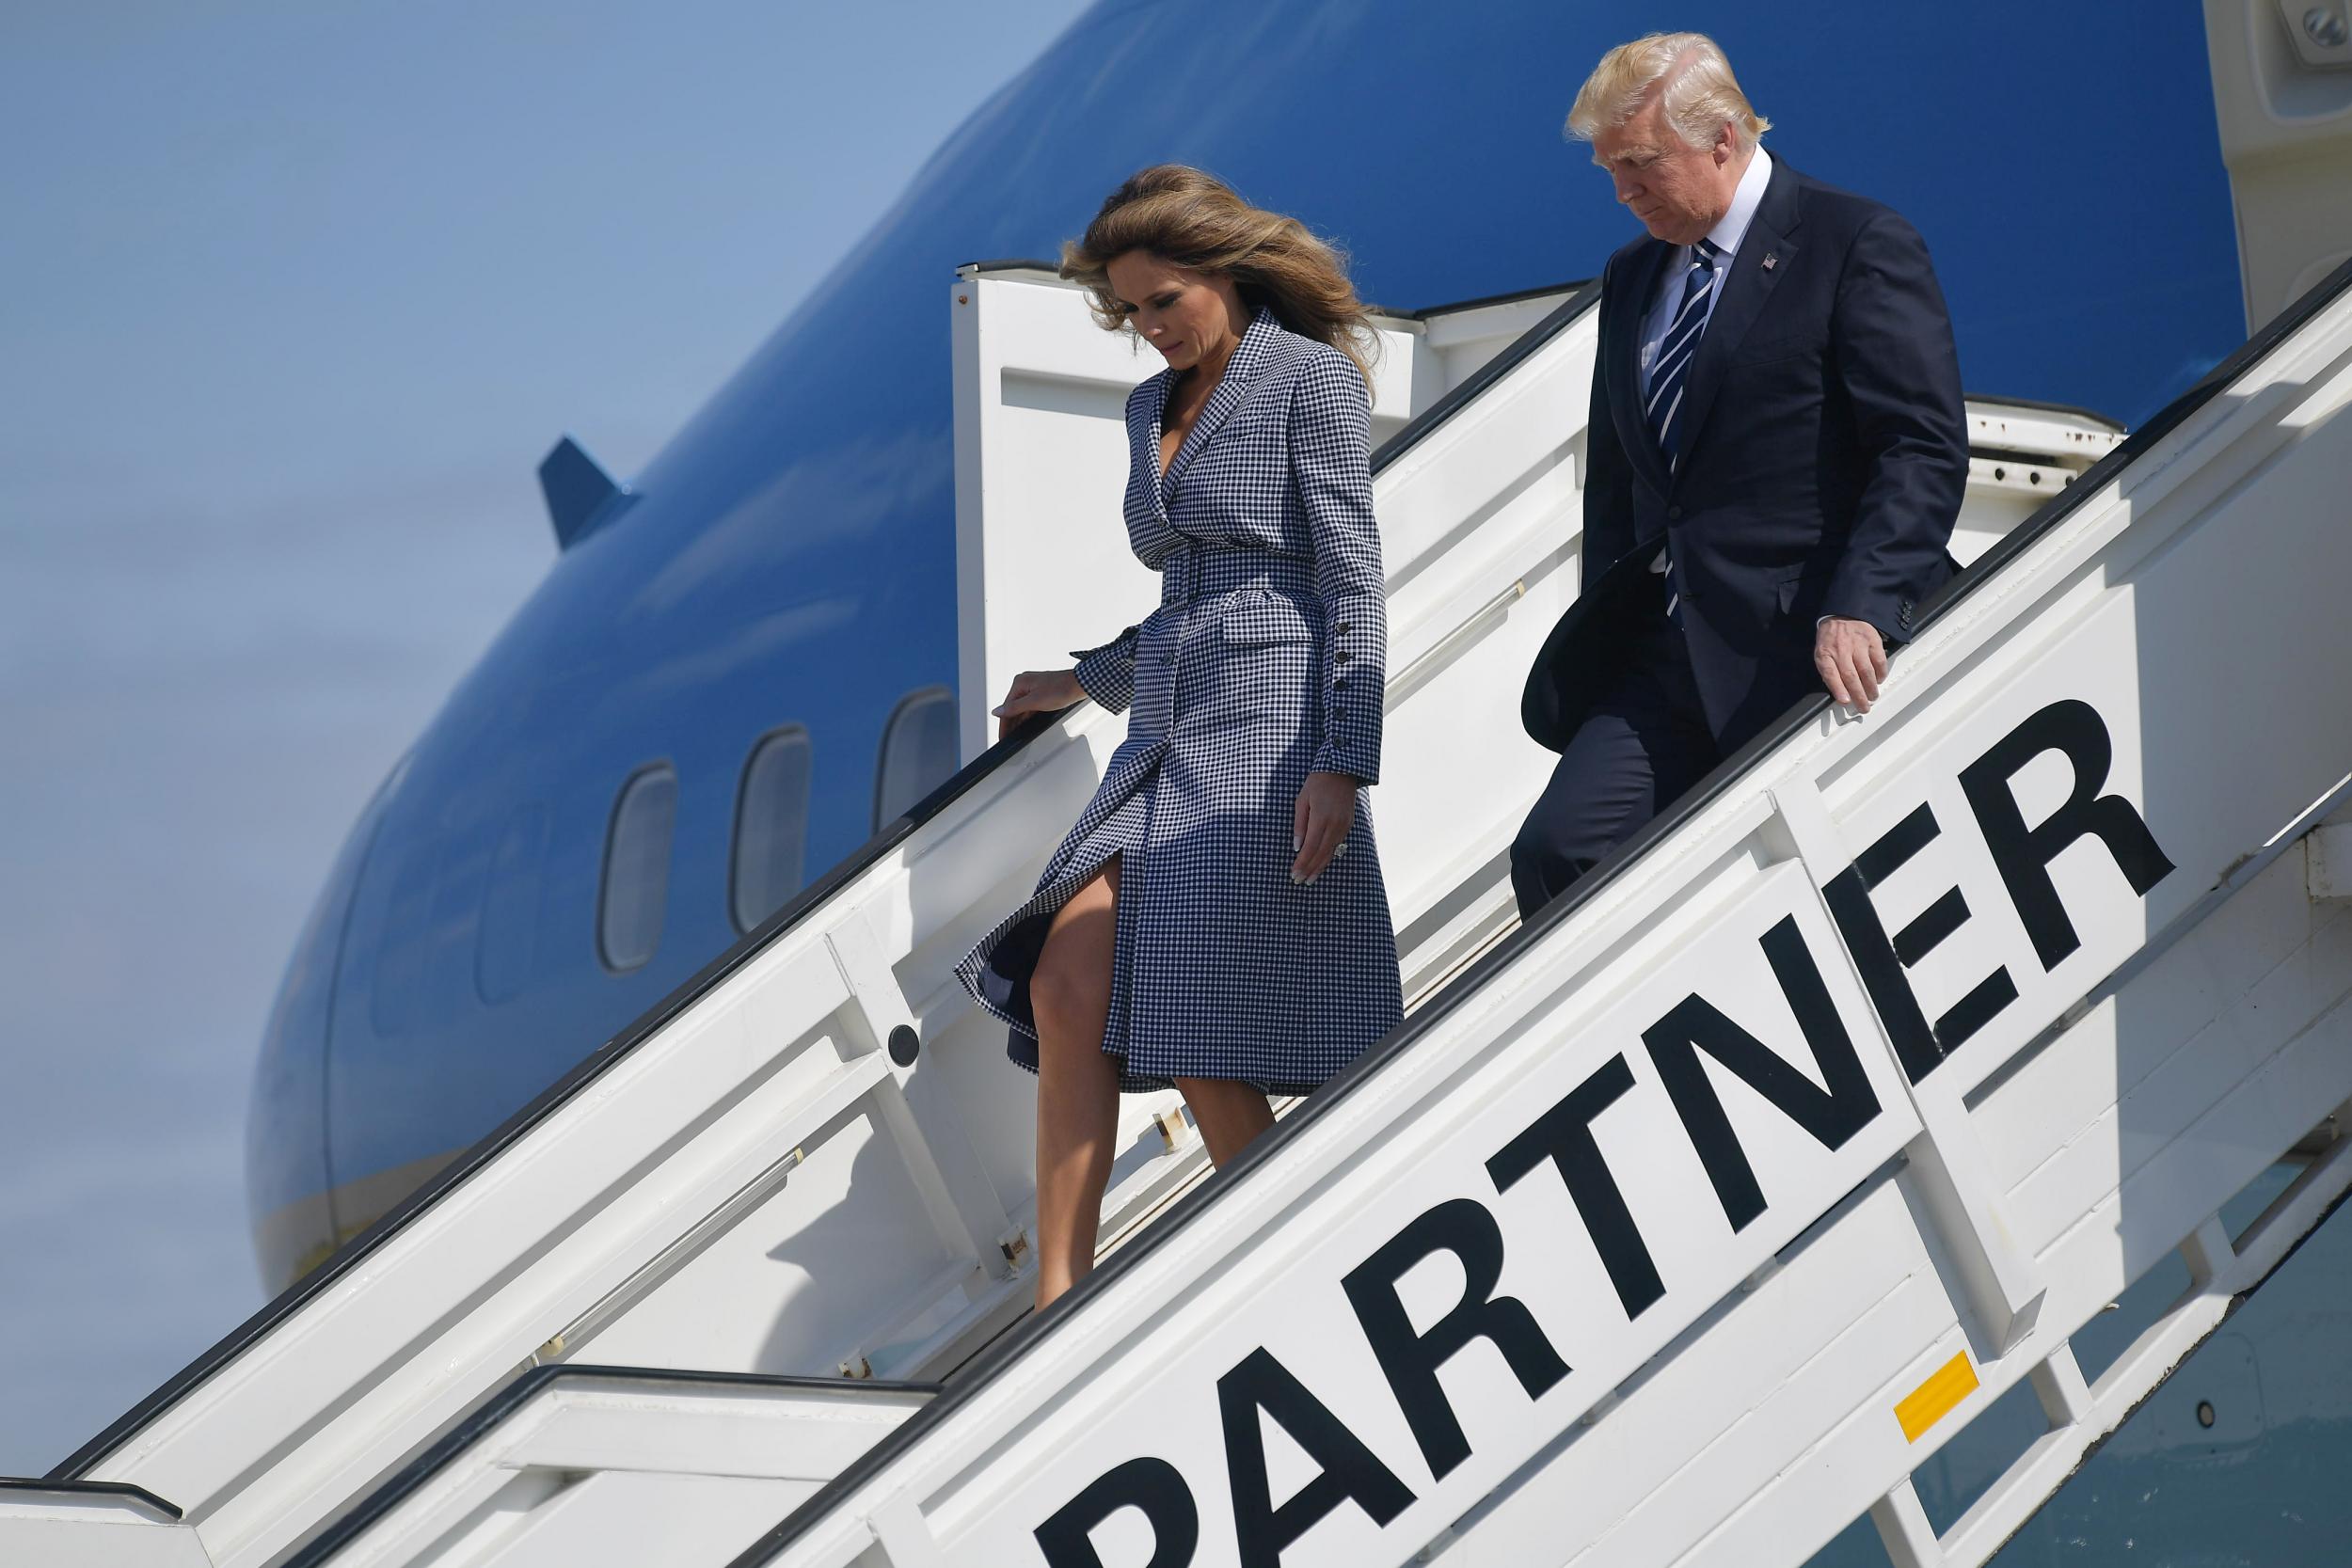 &#13;
Melania made the headlines last week after swatting her husband's hand away when he reached for hers &#13;